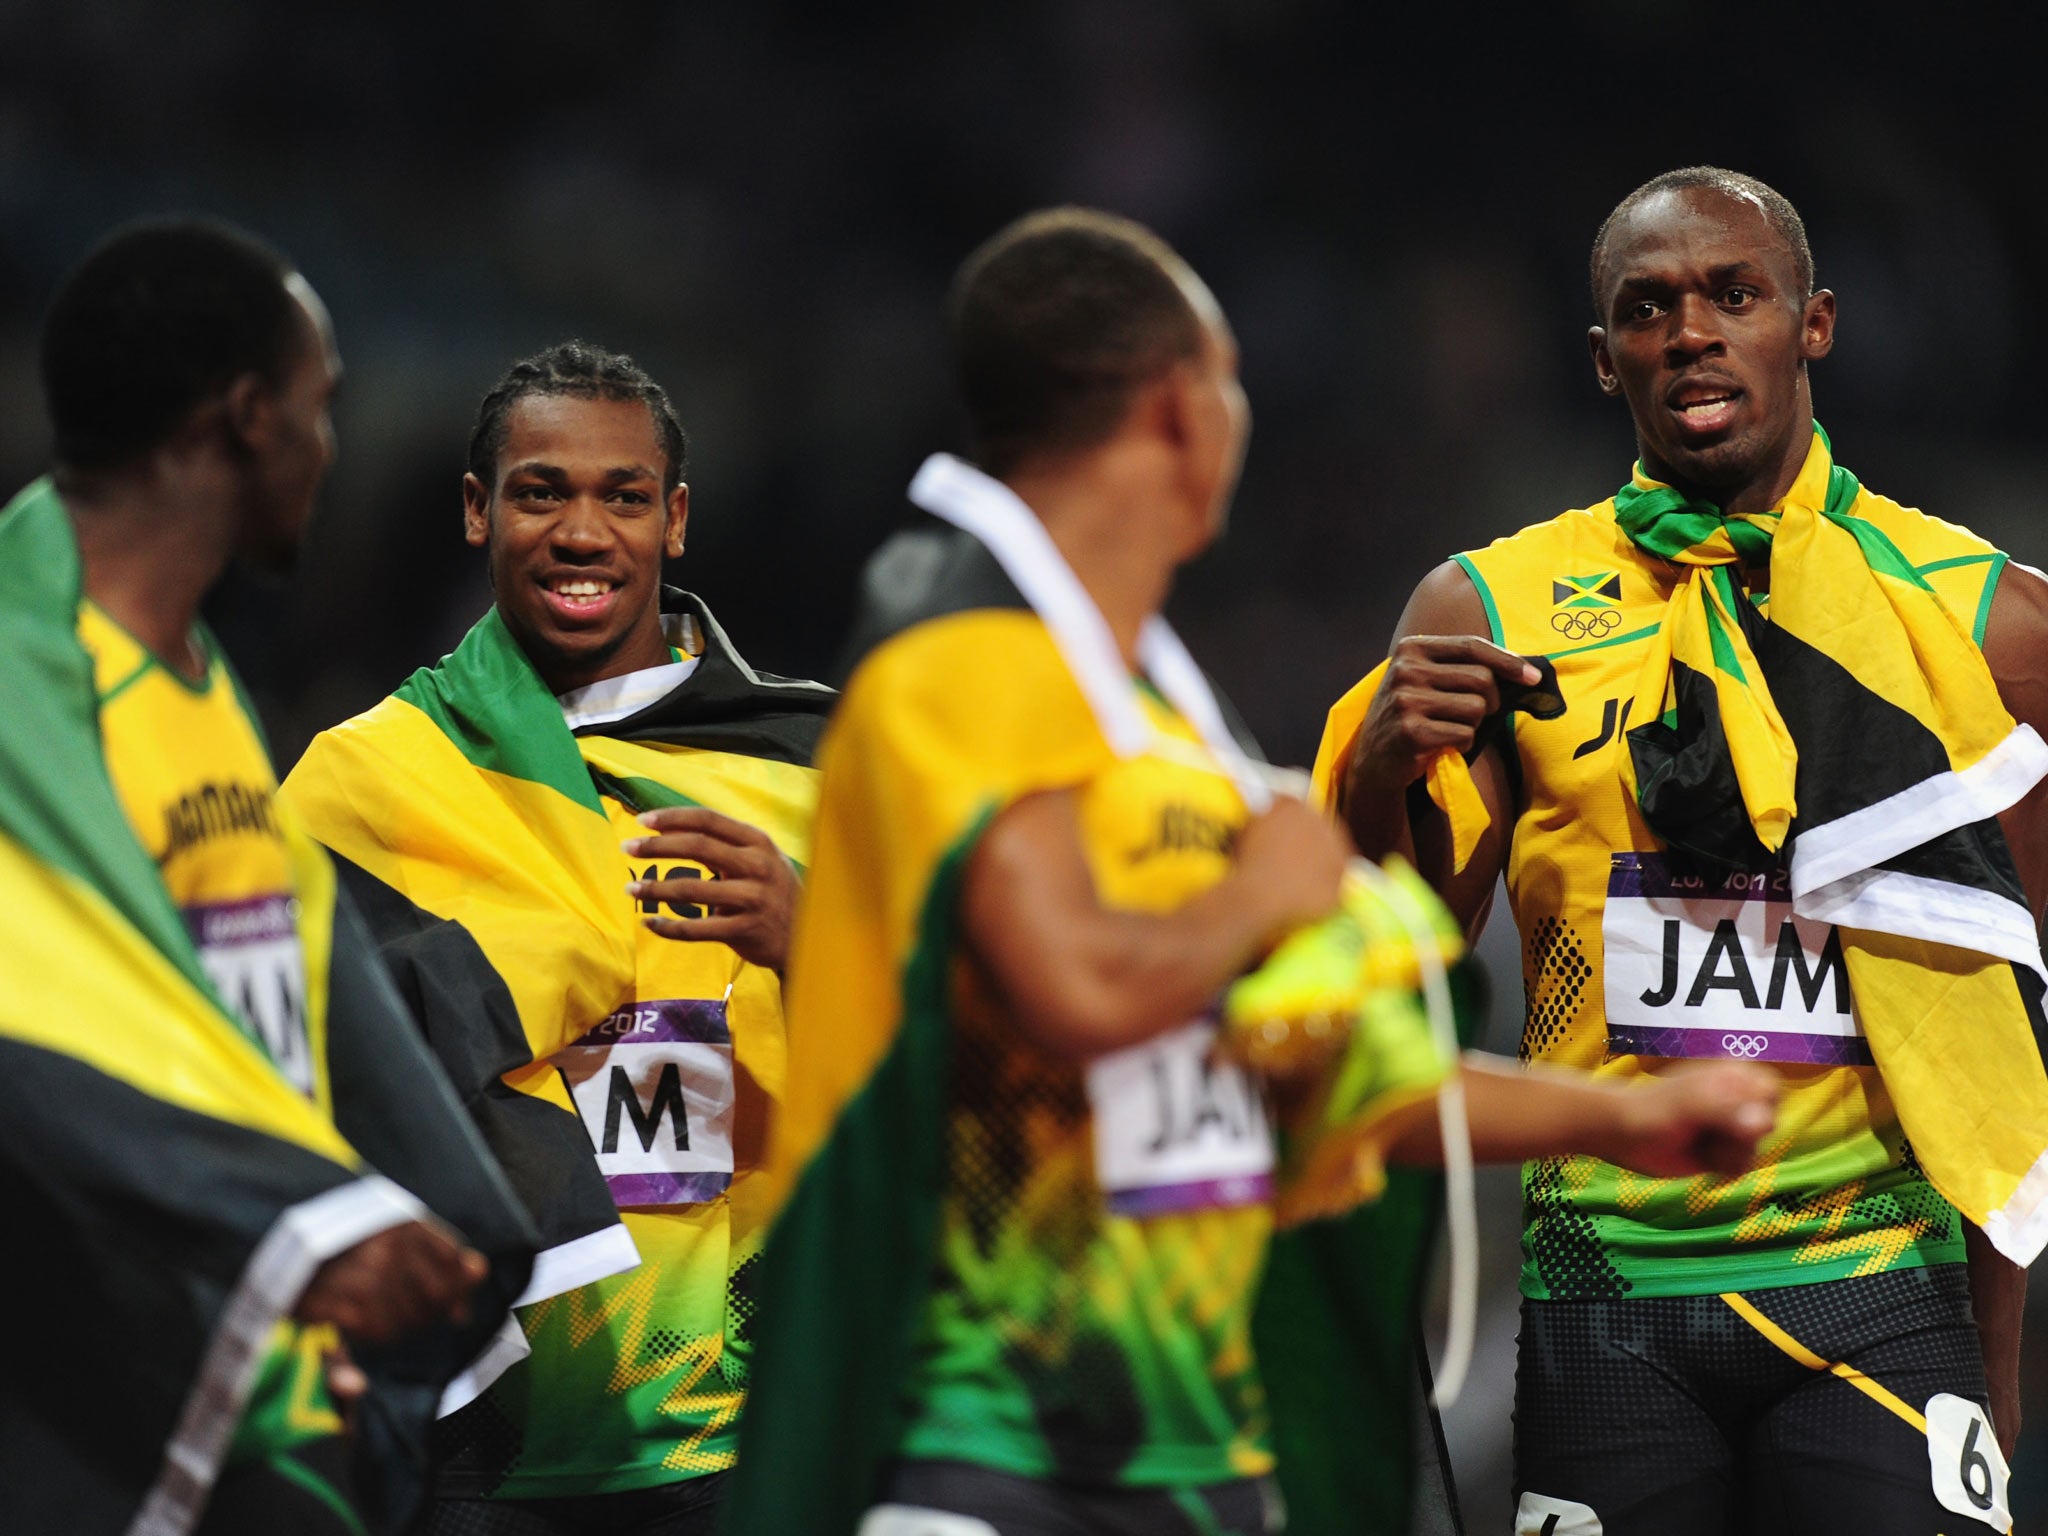 Yohan Blake, Usain Bolt, Nesta Carter and Michael Frater of Jamaica celebrate next to the clock after winning gold and setting a new world record of 36.84 in the 100m relay at the Olympics